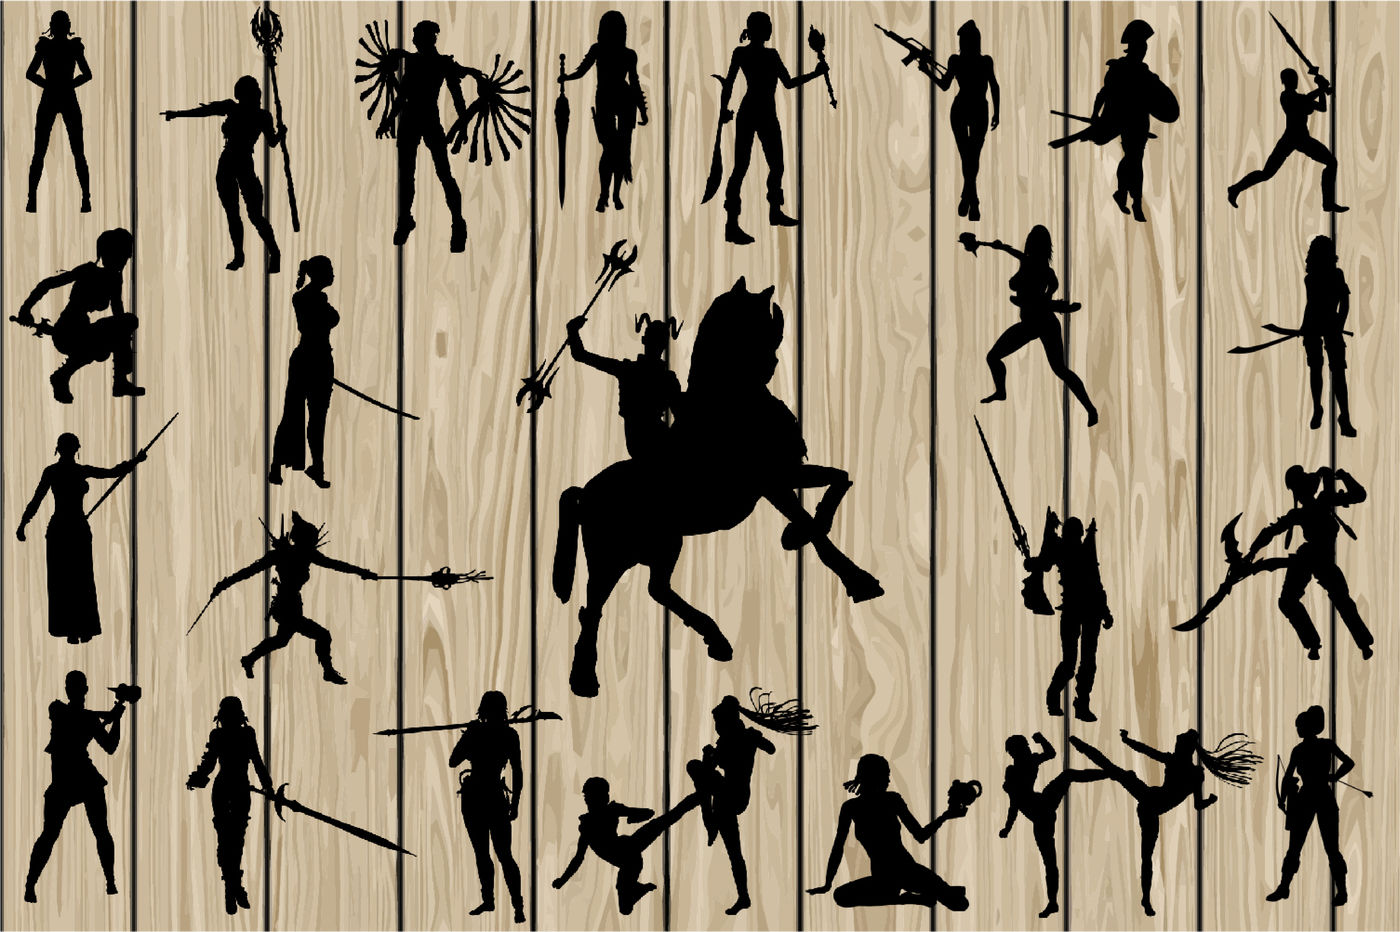 Download 24 Woman Warrior SVG, Woman Warrior Silhouette Clipart, Cutting file. By CosmosFineArt ...